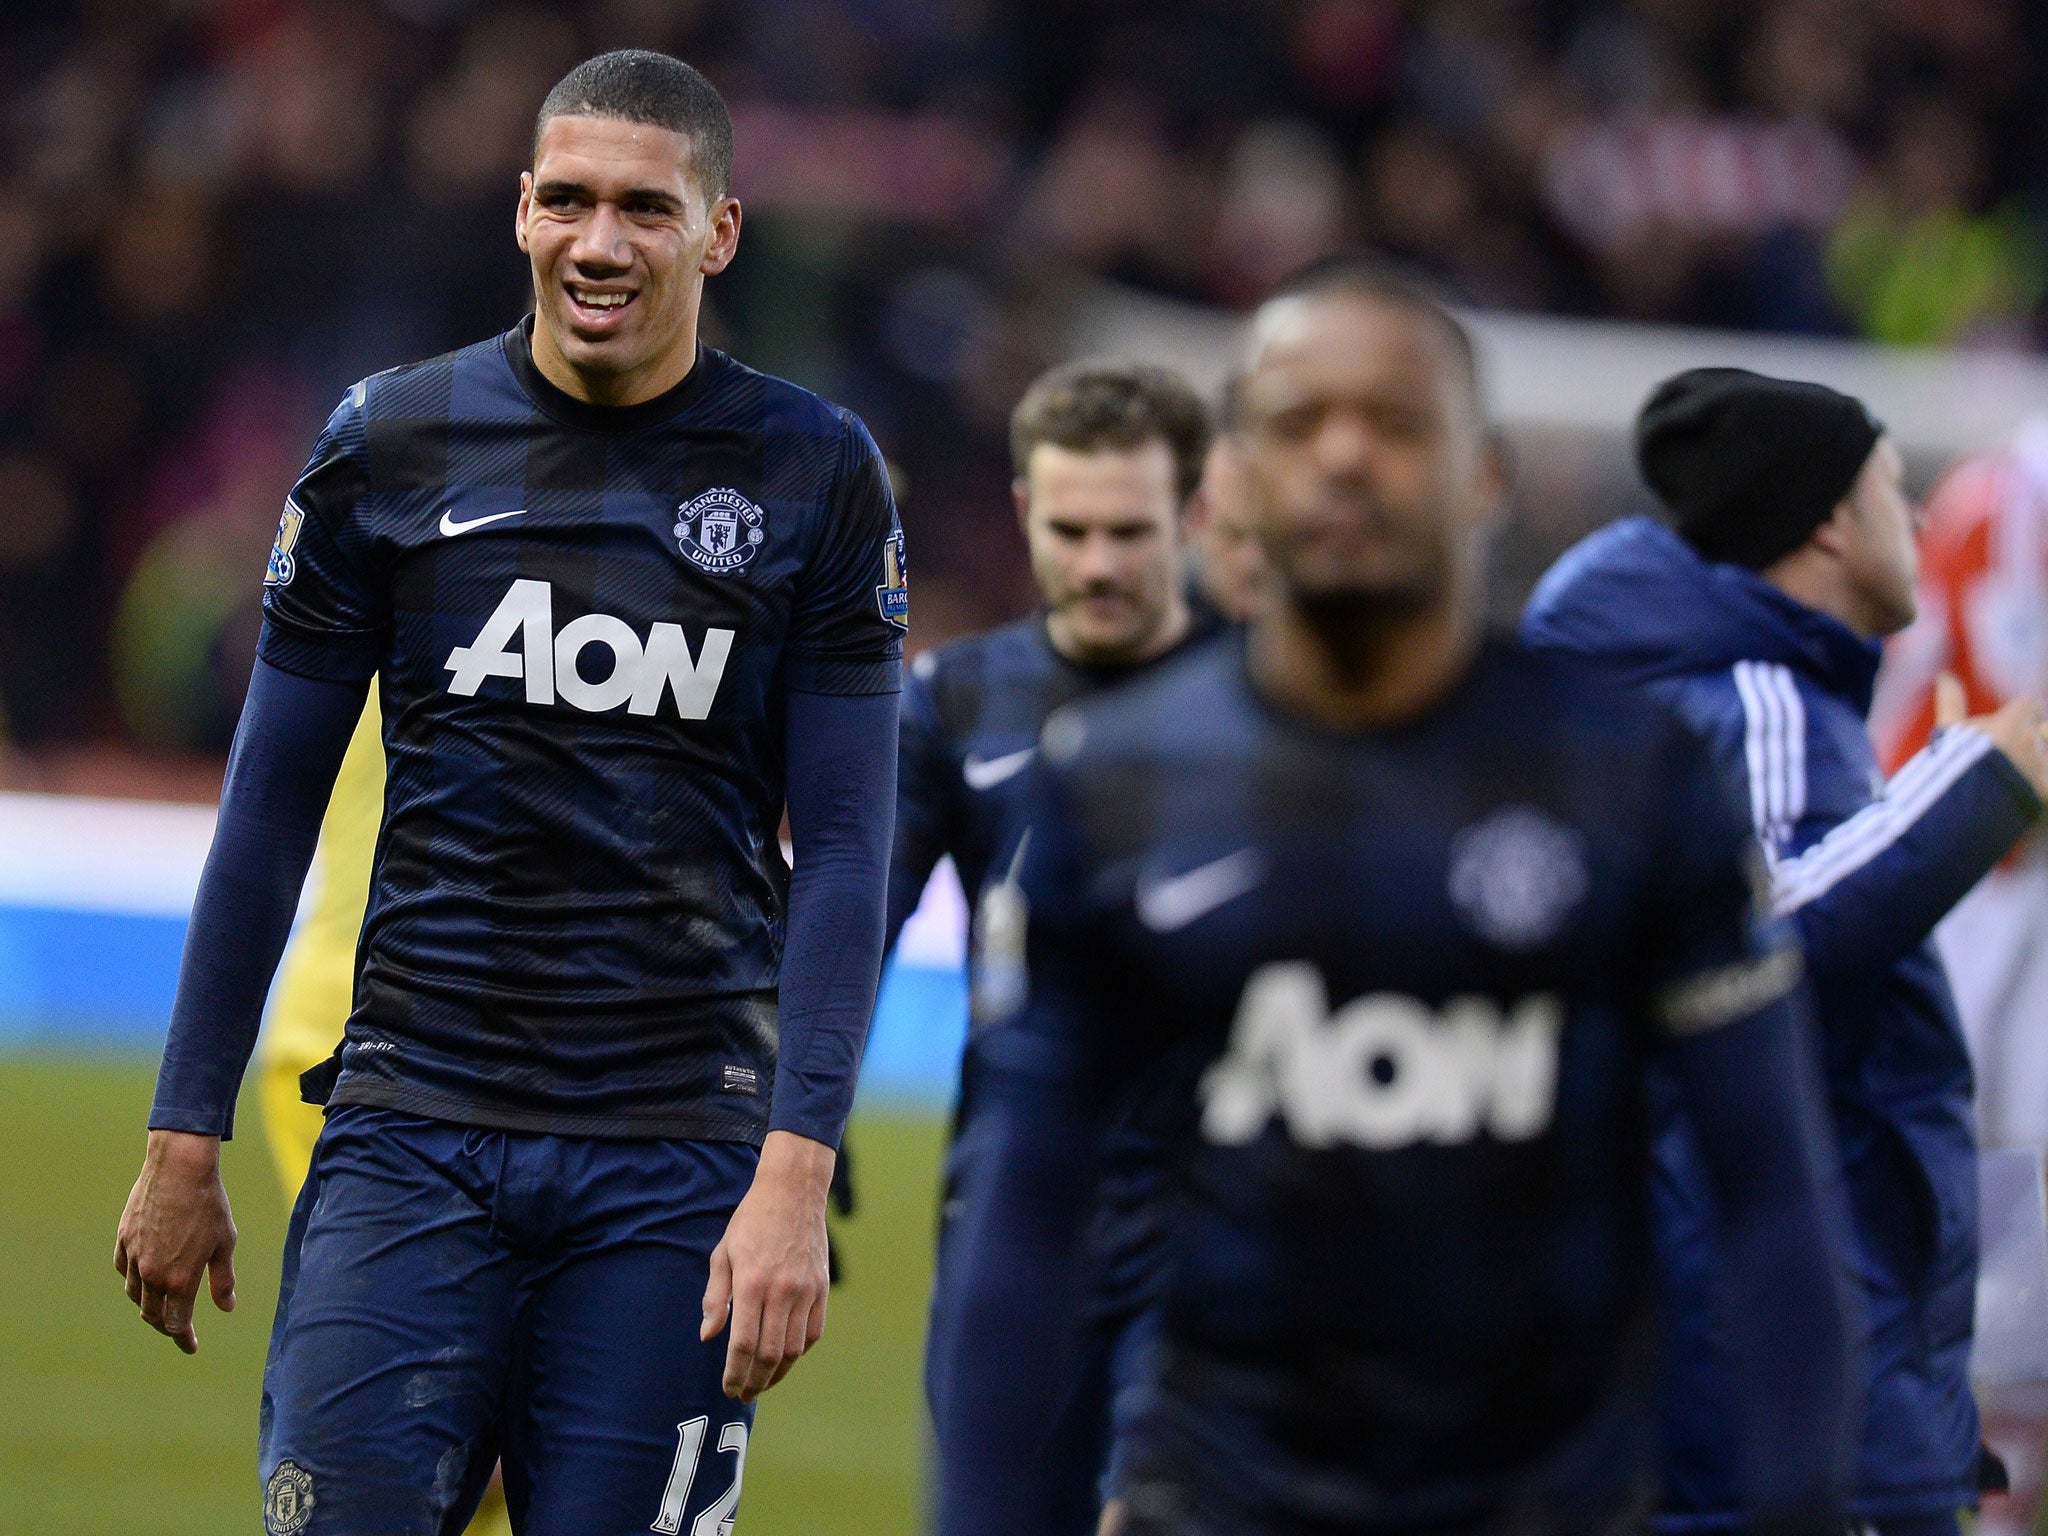 Chris Smalling of Manchester United pictured following the defeat to Stoke City